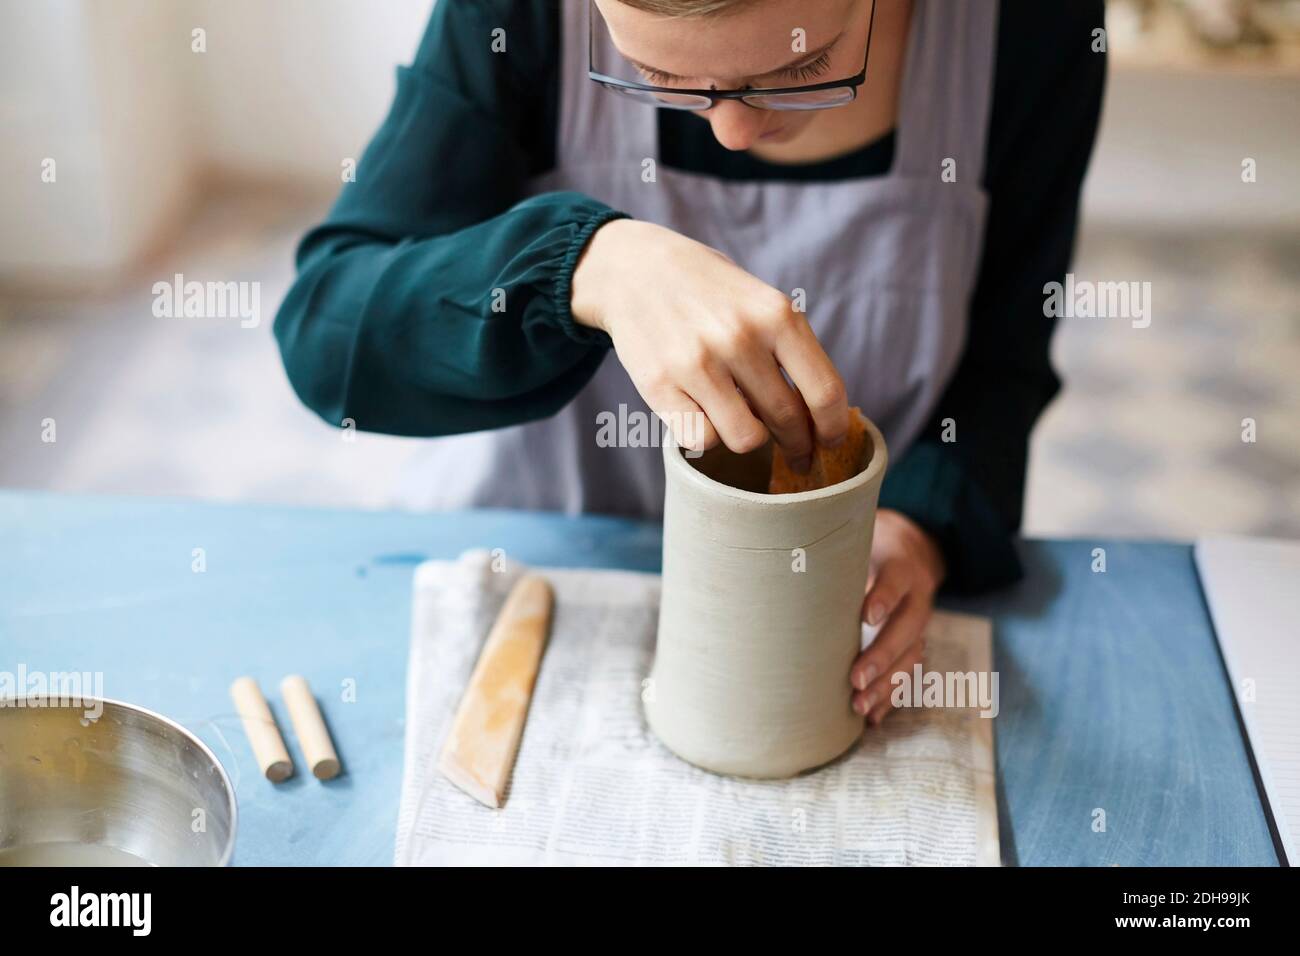 Young woman molding earthenware at table in art studio Stock Photo